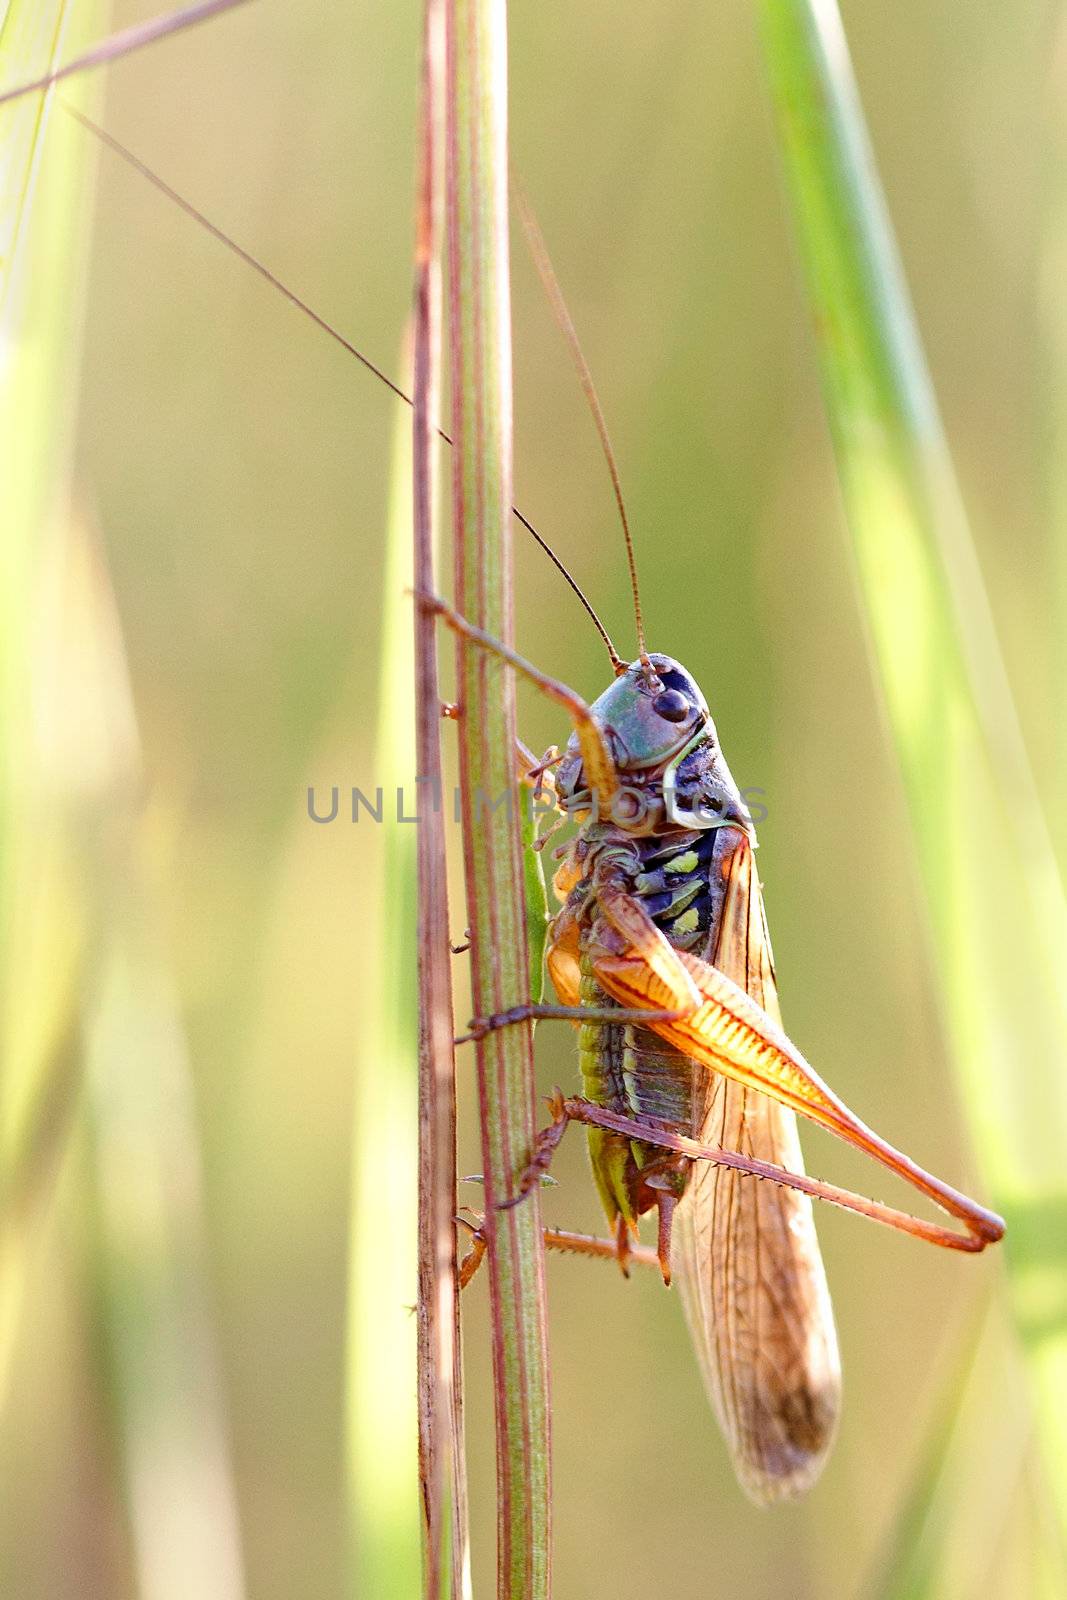 Locust on a grass shined with the sun